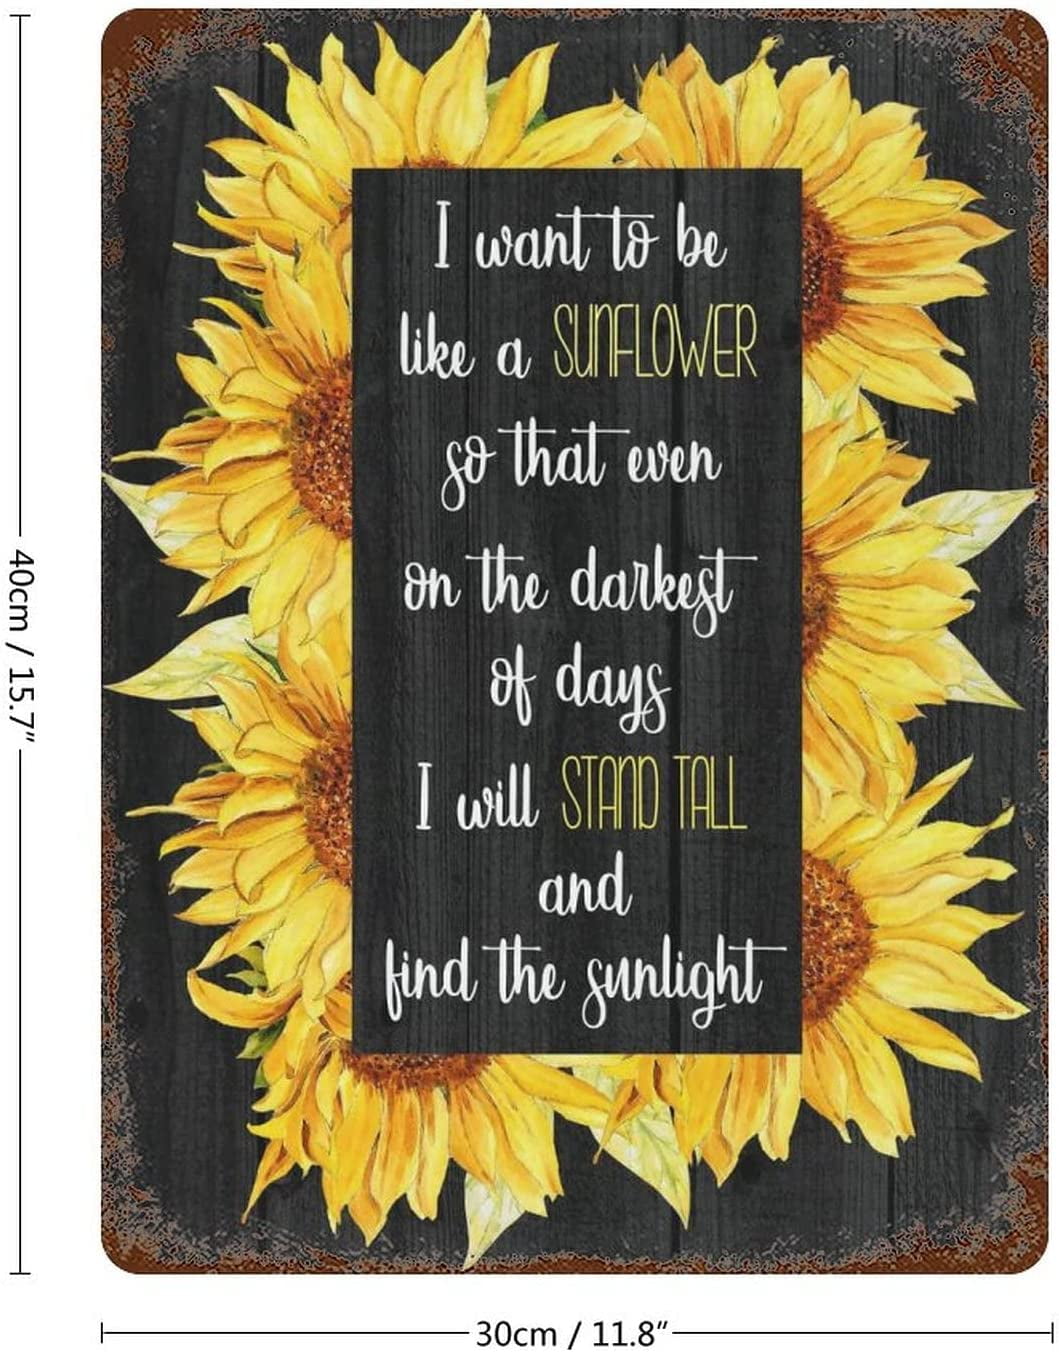 I Want To Be A Sunflower Quote Vintage Metal Tin Sign Sunflower  Inspirational Quote Home Decor Funny Novelty Kitchen Bar Club Garage Garden  Farm Wall Art Tin Signs 12X16 Inches 